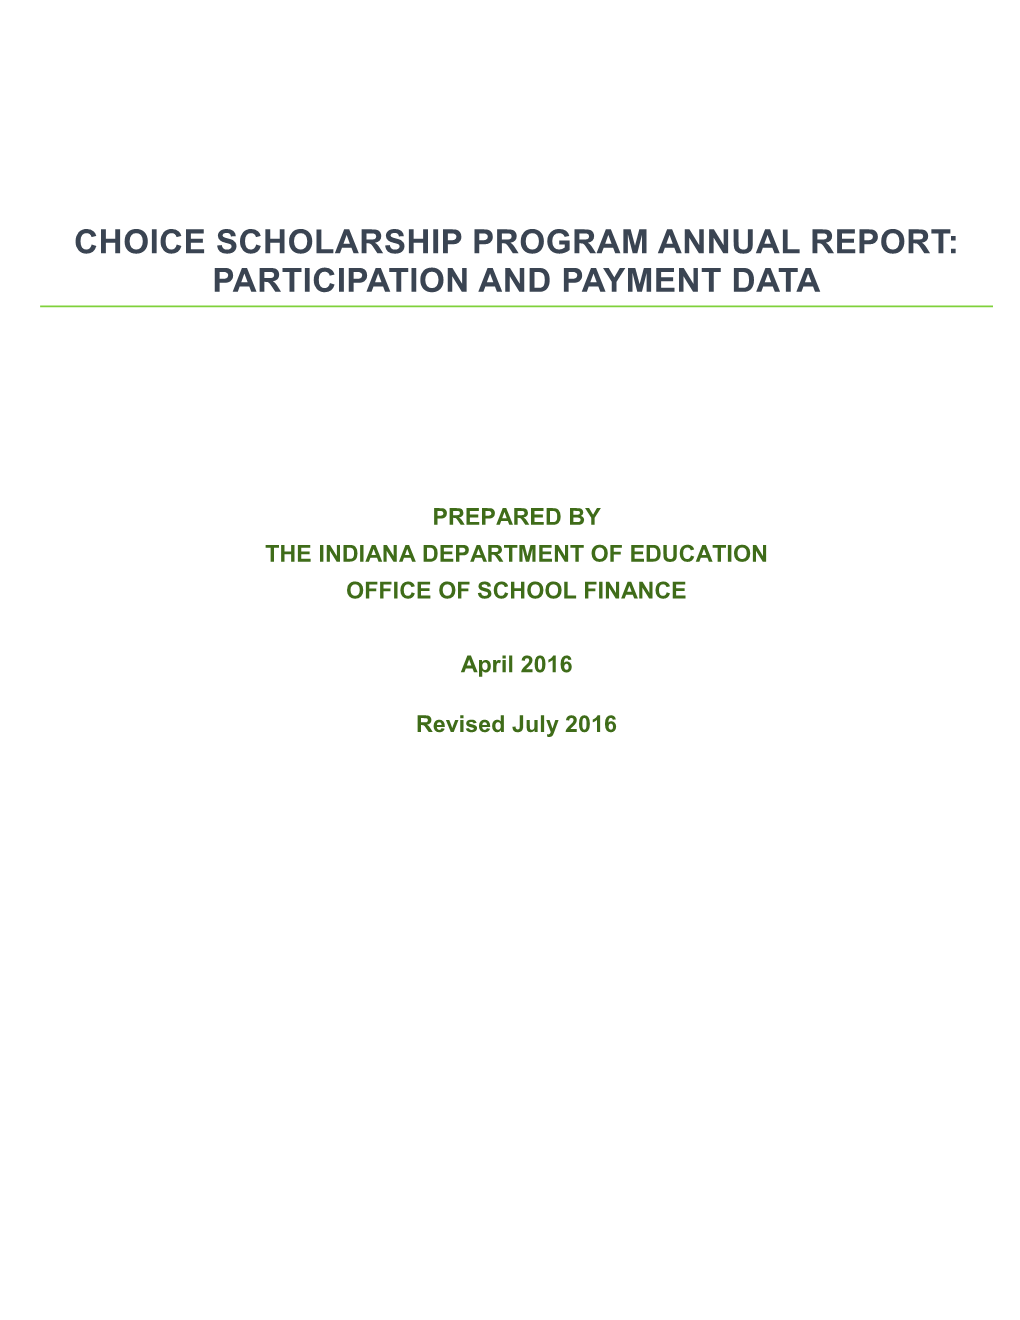 Choice Scholarship Program Annual Report: Participation and Payment Data